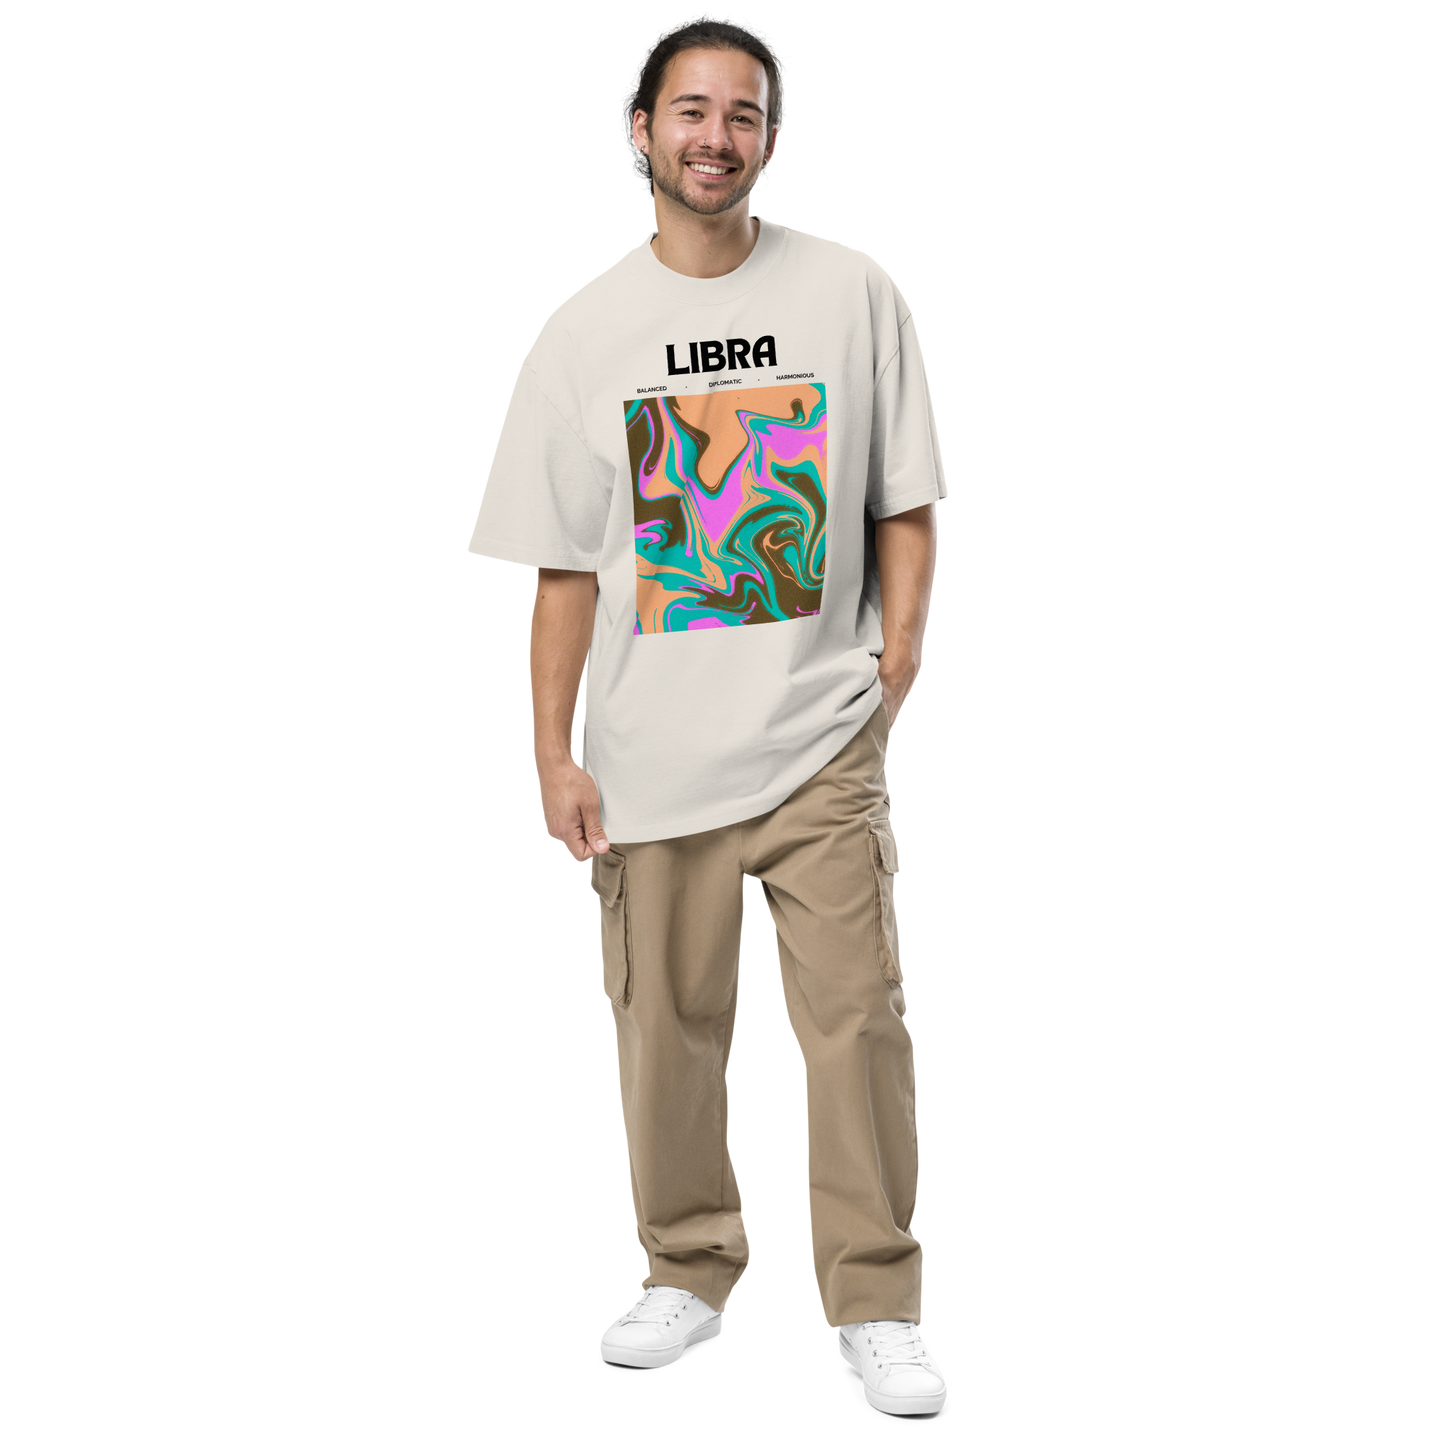 Man wearing a Faded Bone Libra Oversized T-Shirt featuring an Abstract Libra Star Sign graphic on the chest - Cool Graphic Zodiac Oversized Tees - Boozy Fox